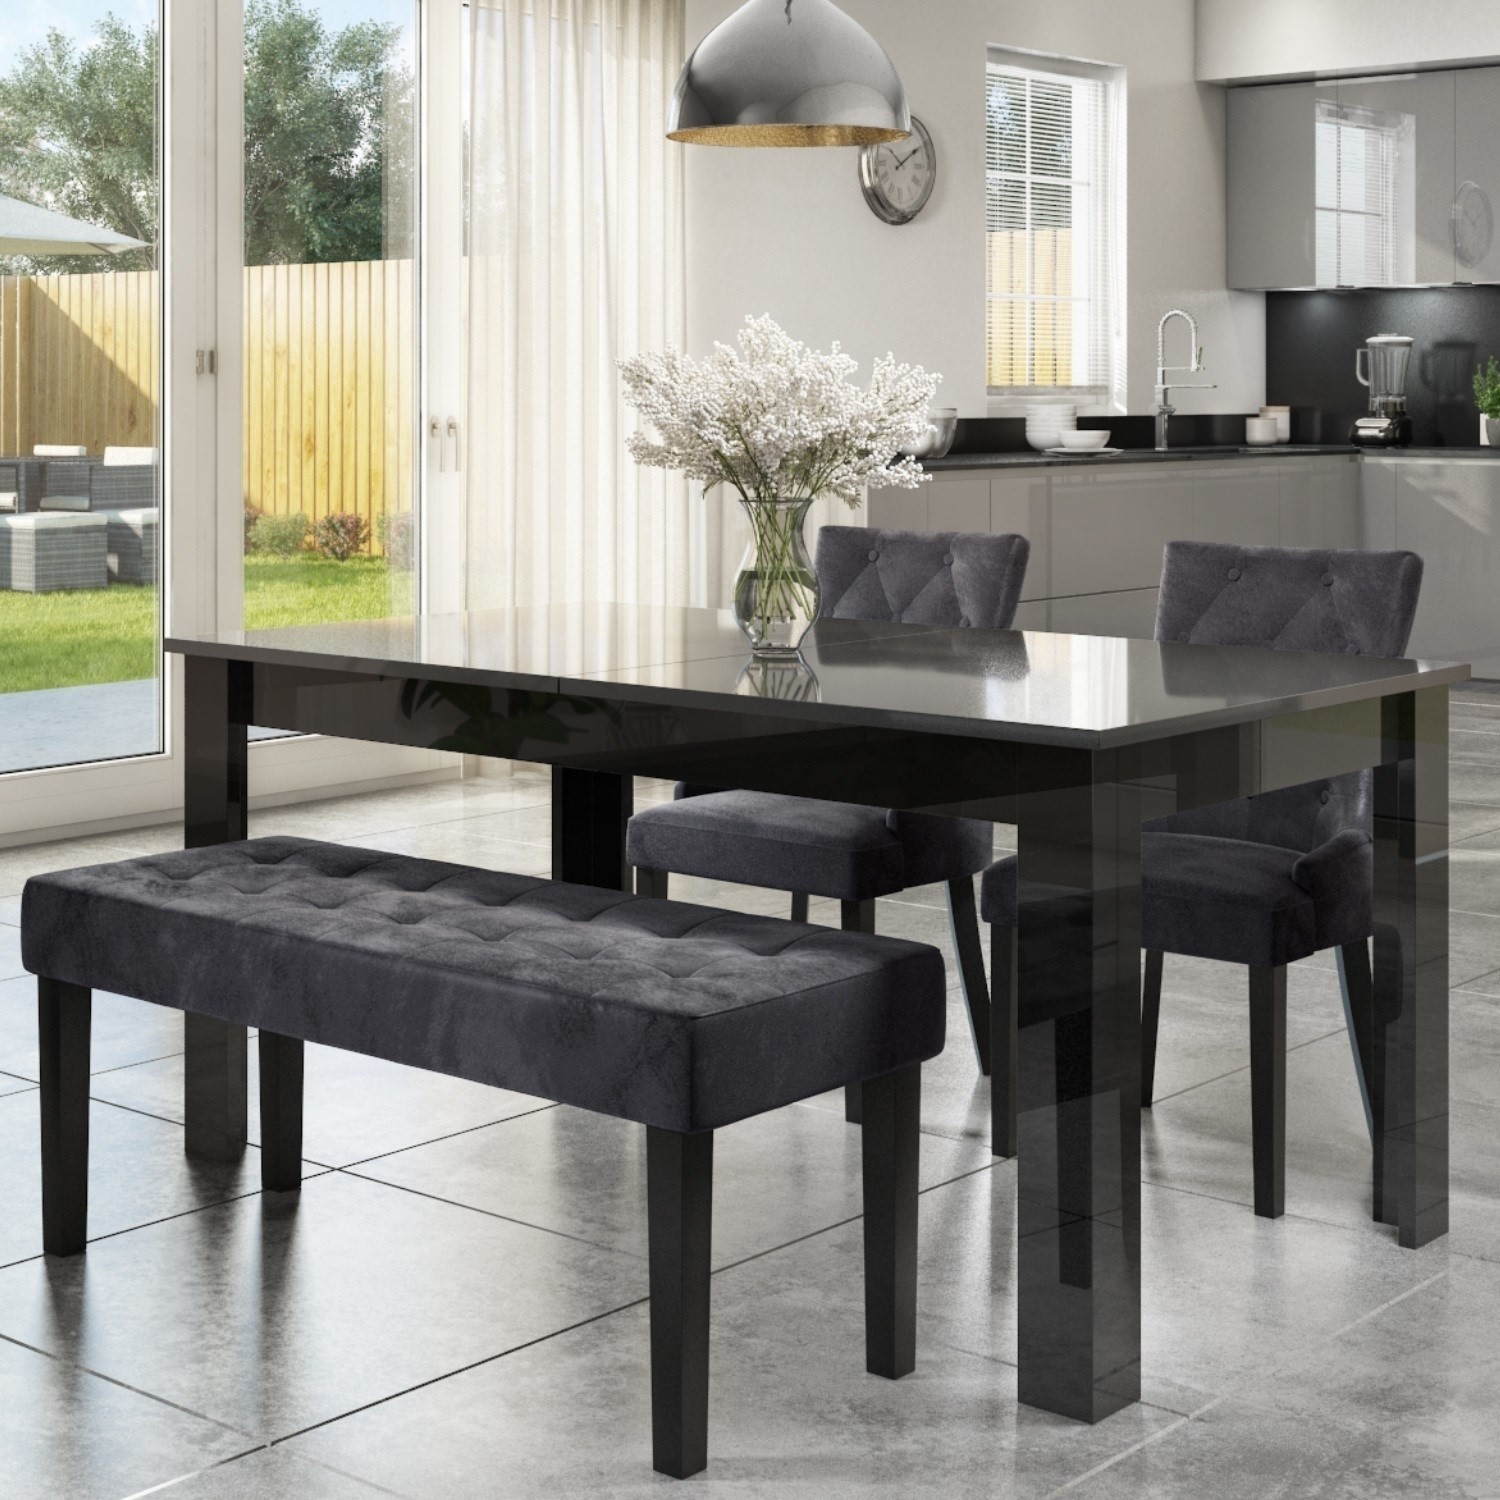 Extendable Dining Table In Black High, Luxury Dining Room Tables And Chairs Uk